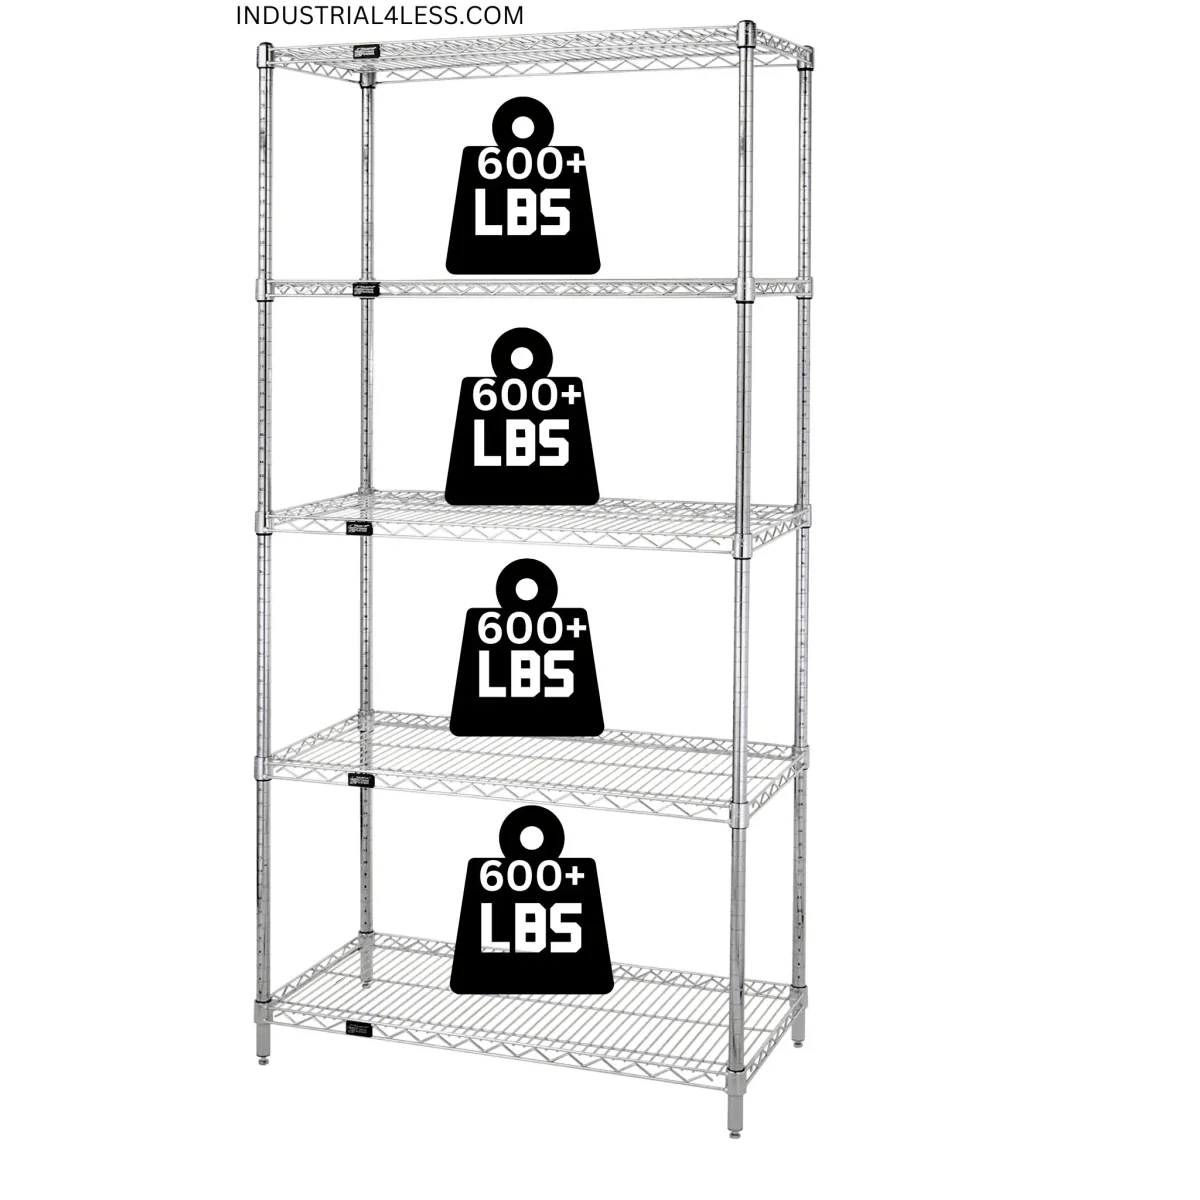 12" x 36" Stainless Steel Wire Shelving Unit - Industrial 4 Less - 12365S-5